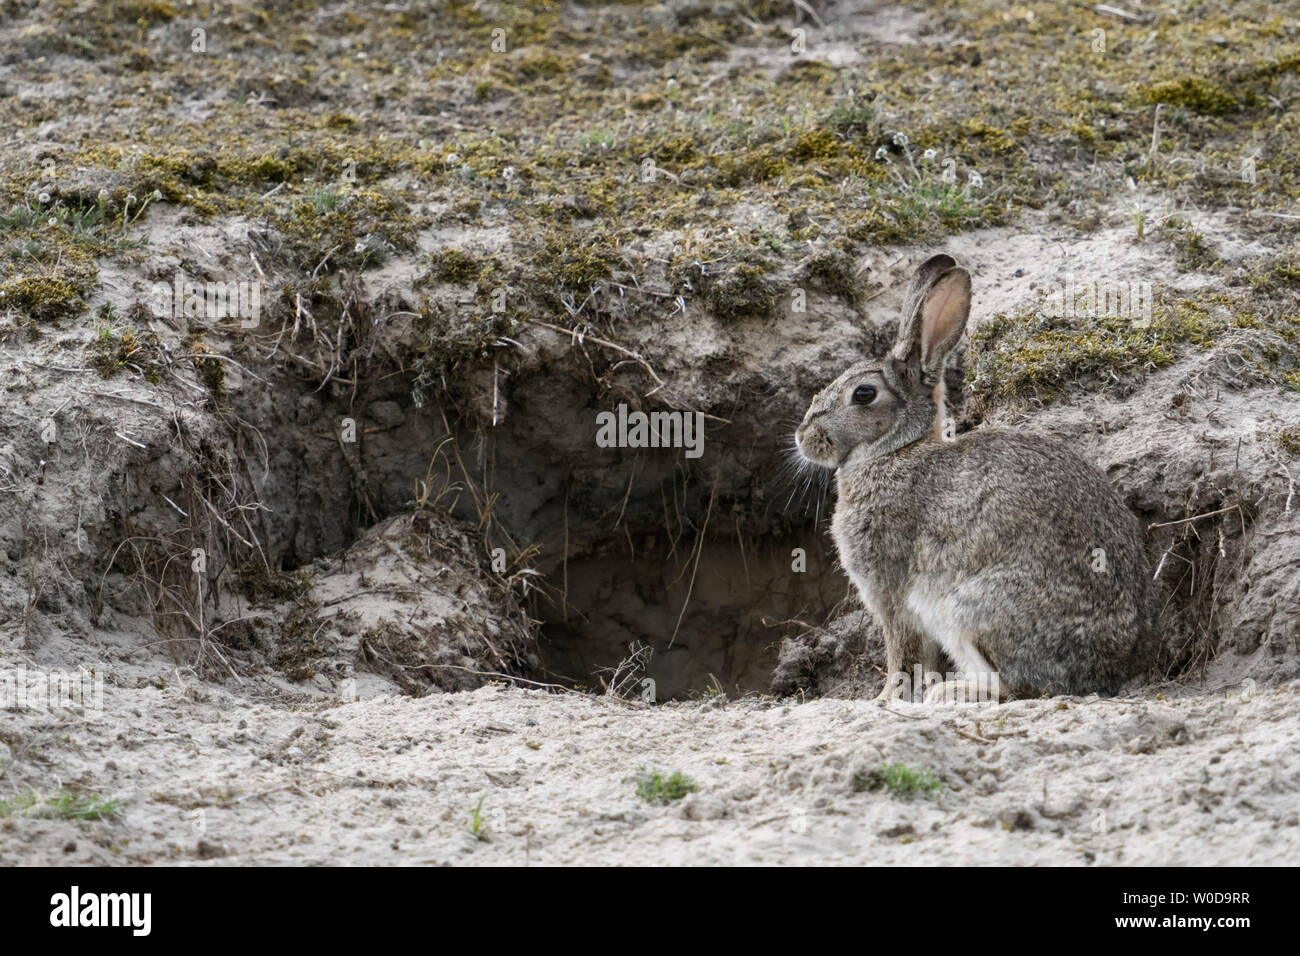 European Rabbit ( Oryctolagus cuniculus ), adult, sitting in font of rabbit's burrow in the dunes, wildlife, Europe. Stock Photo